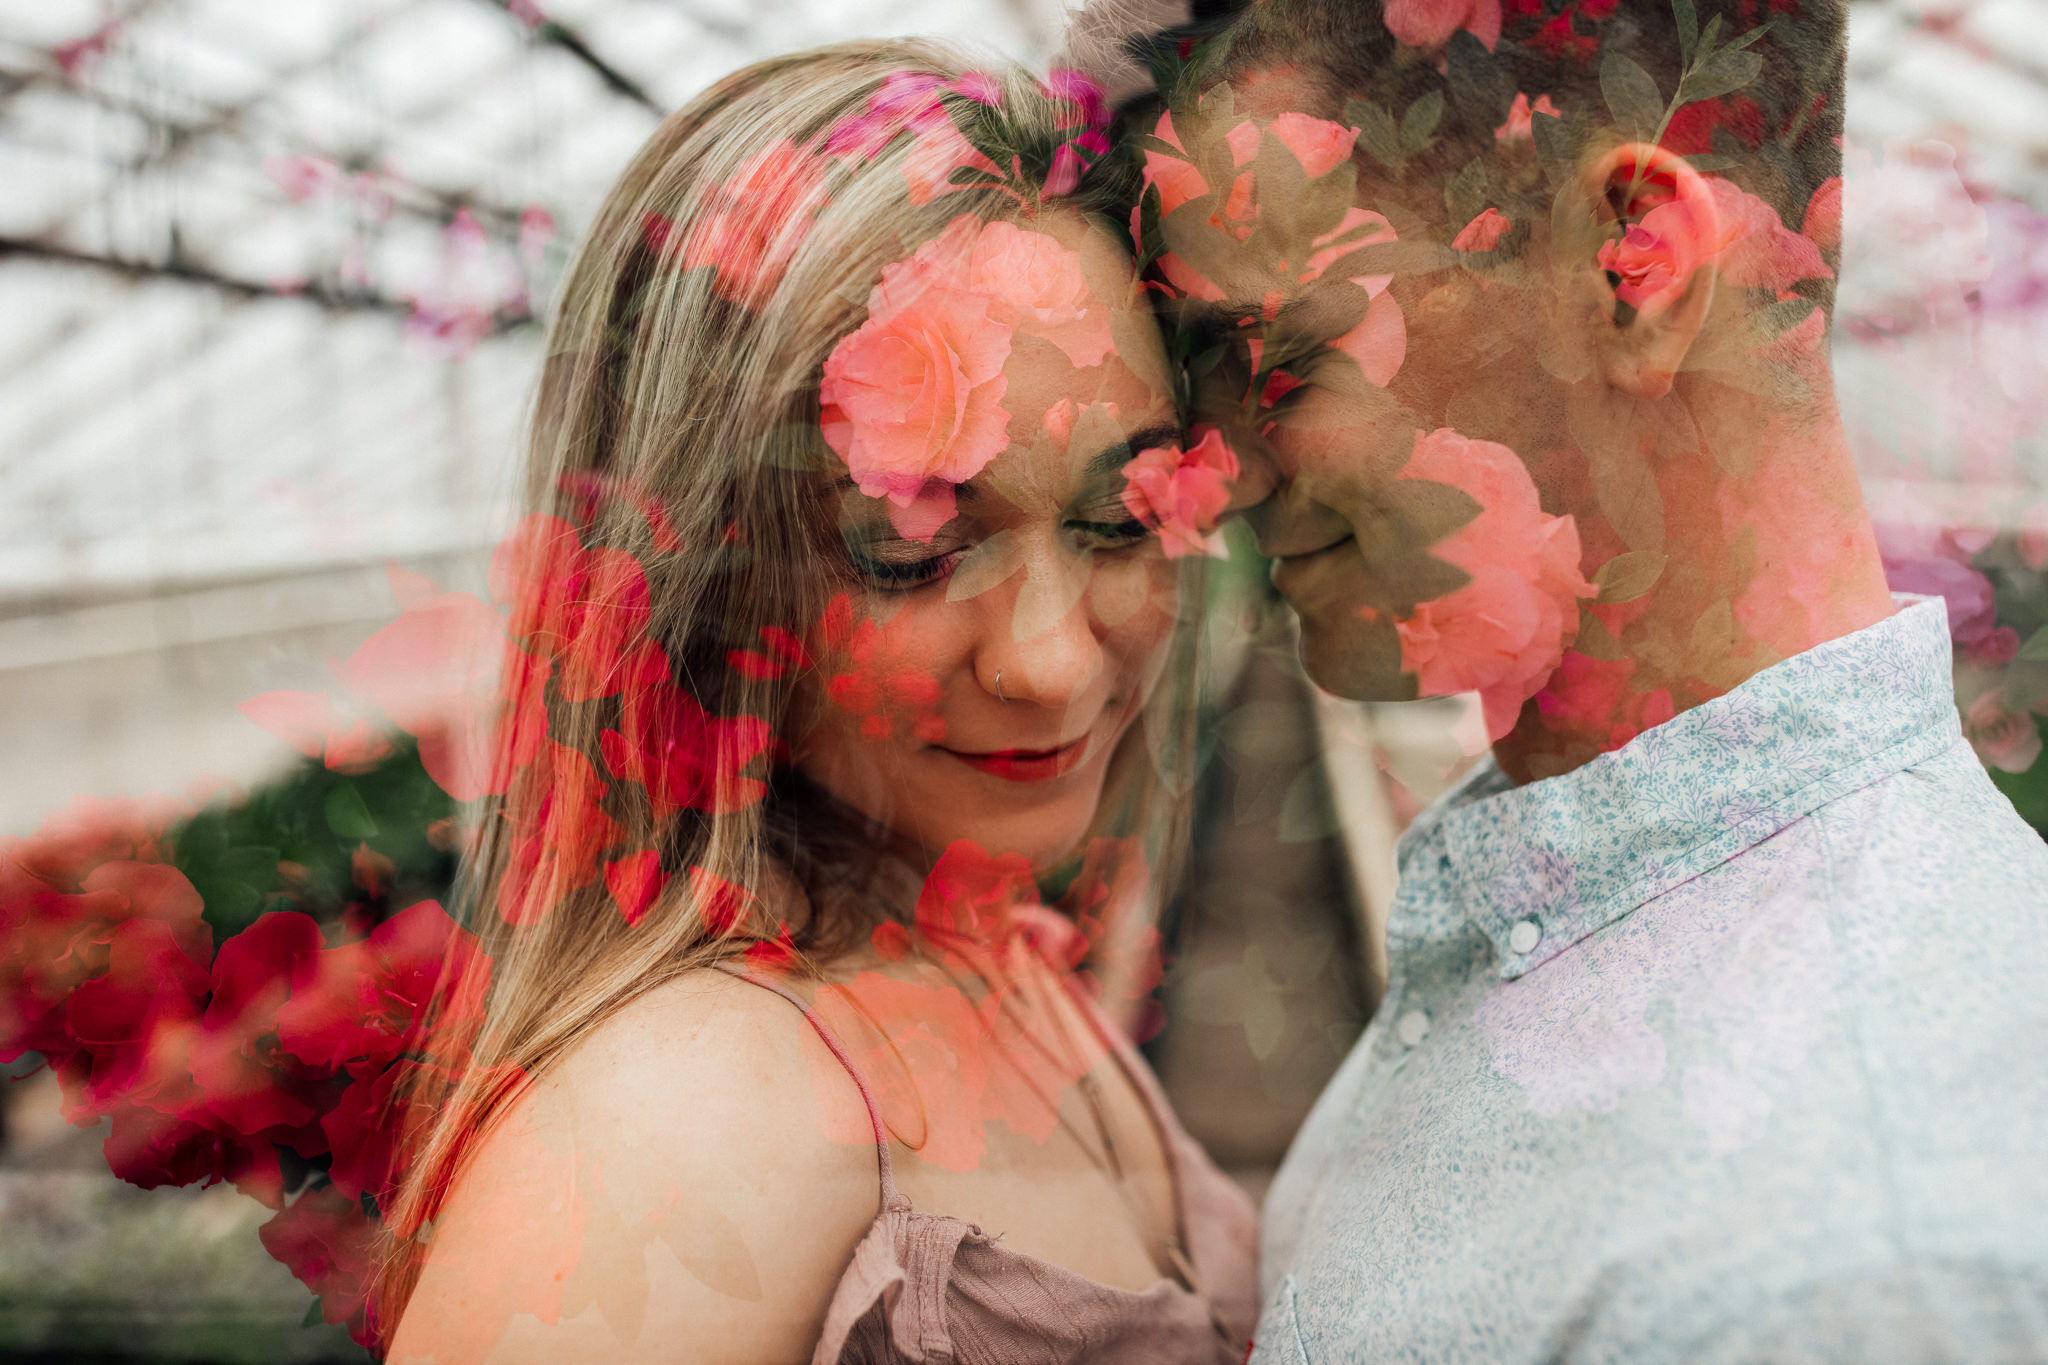 memphis-engagement-photographer-thewarmtharoundyou-greenhouse-engagement-pictures (89 of 118).jpg